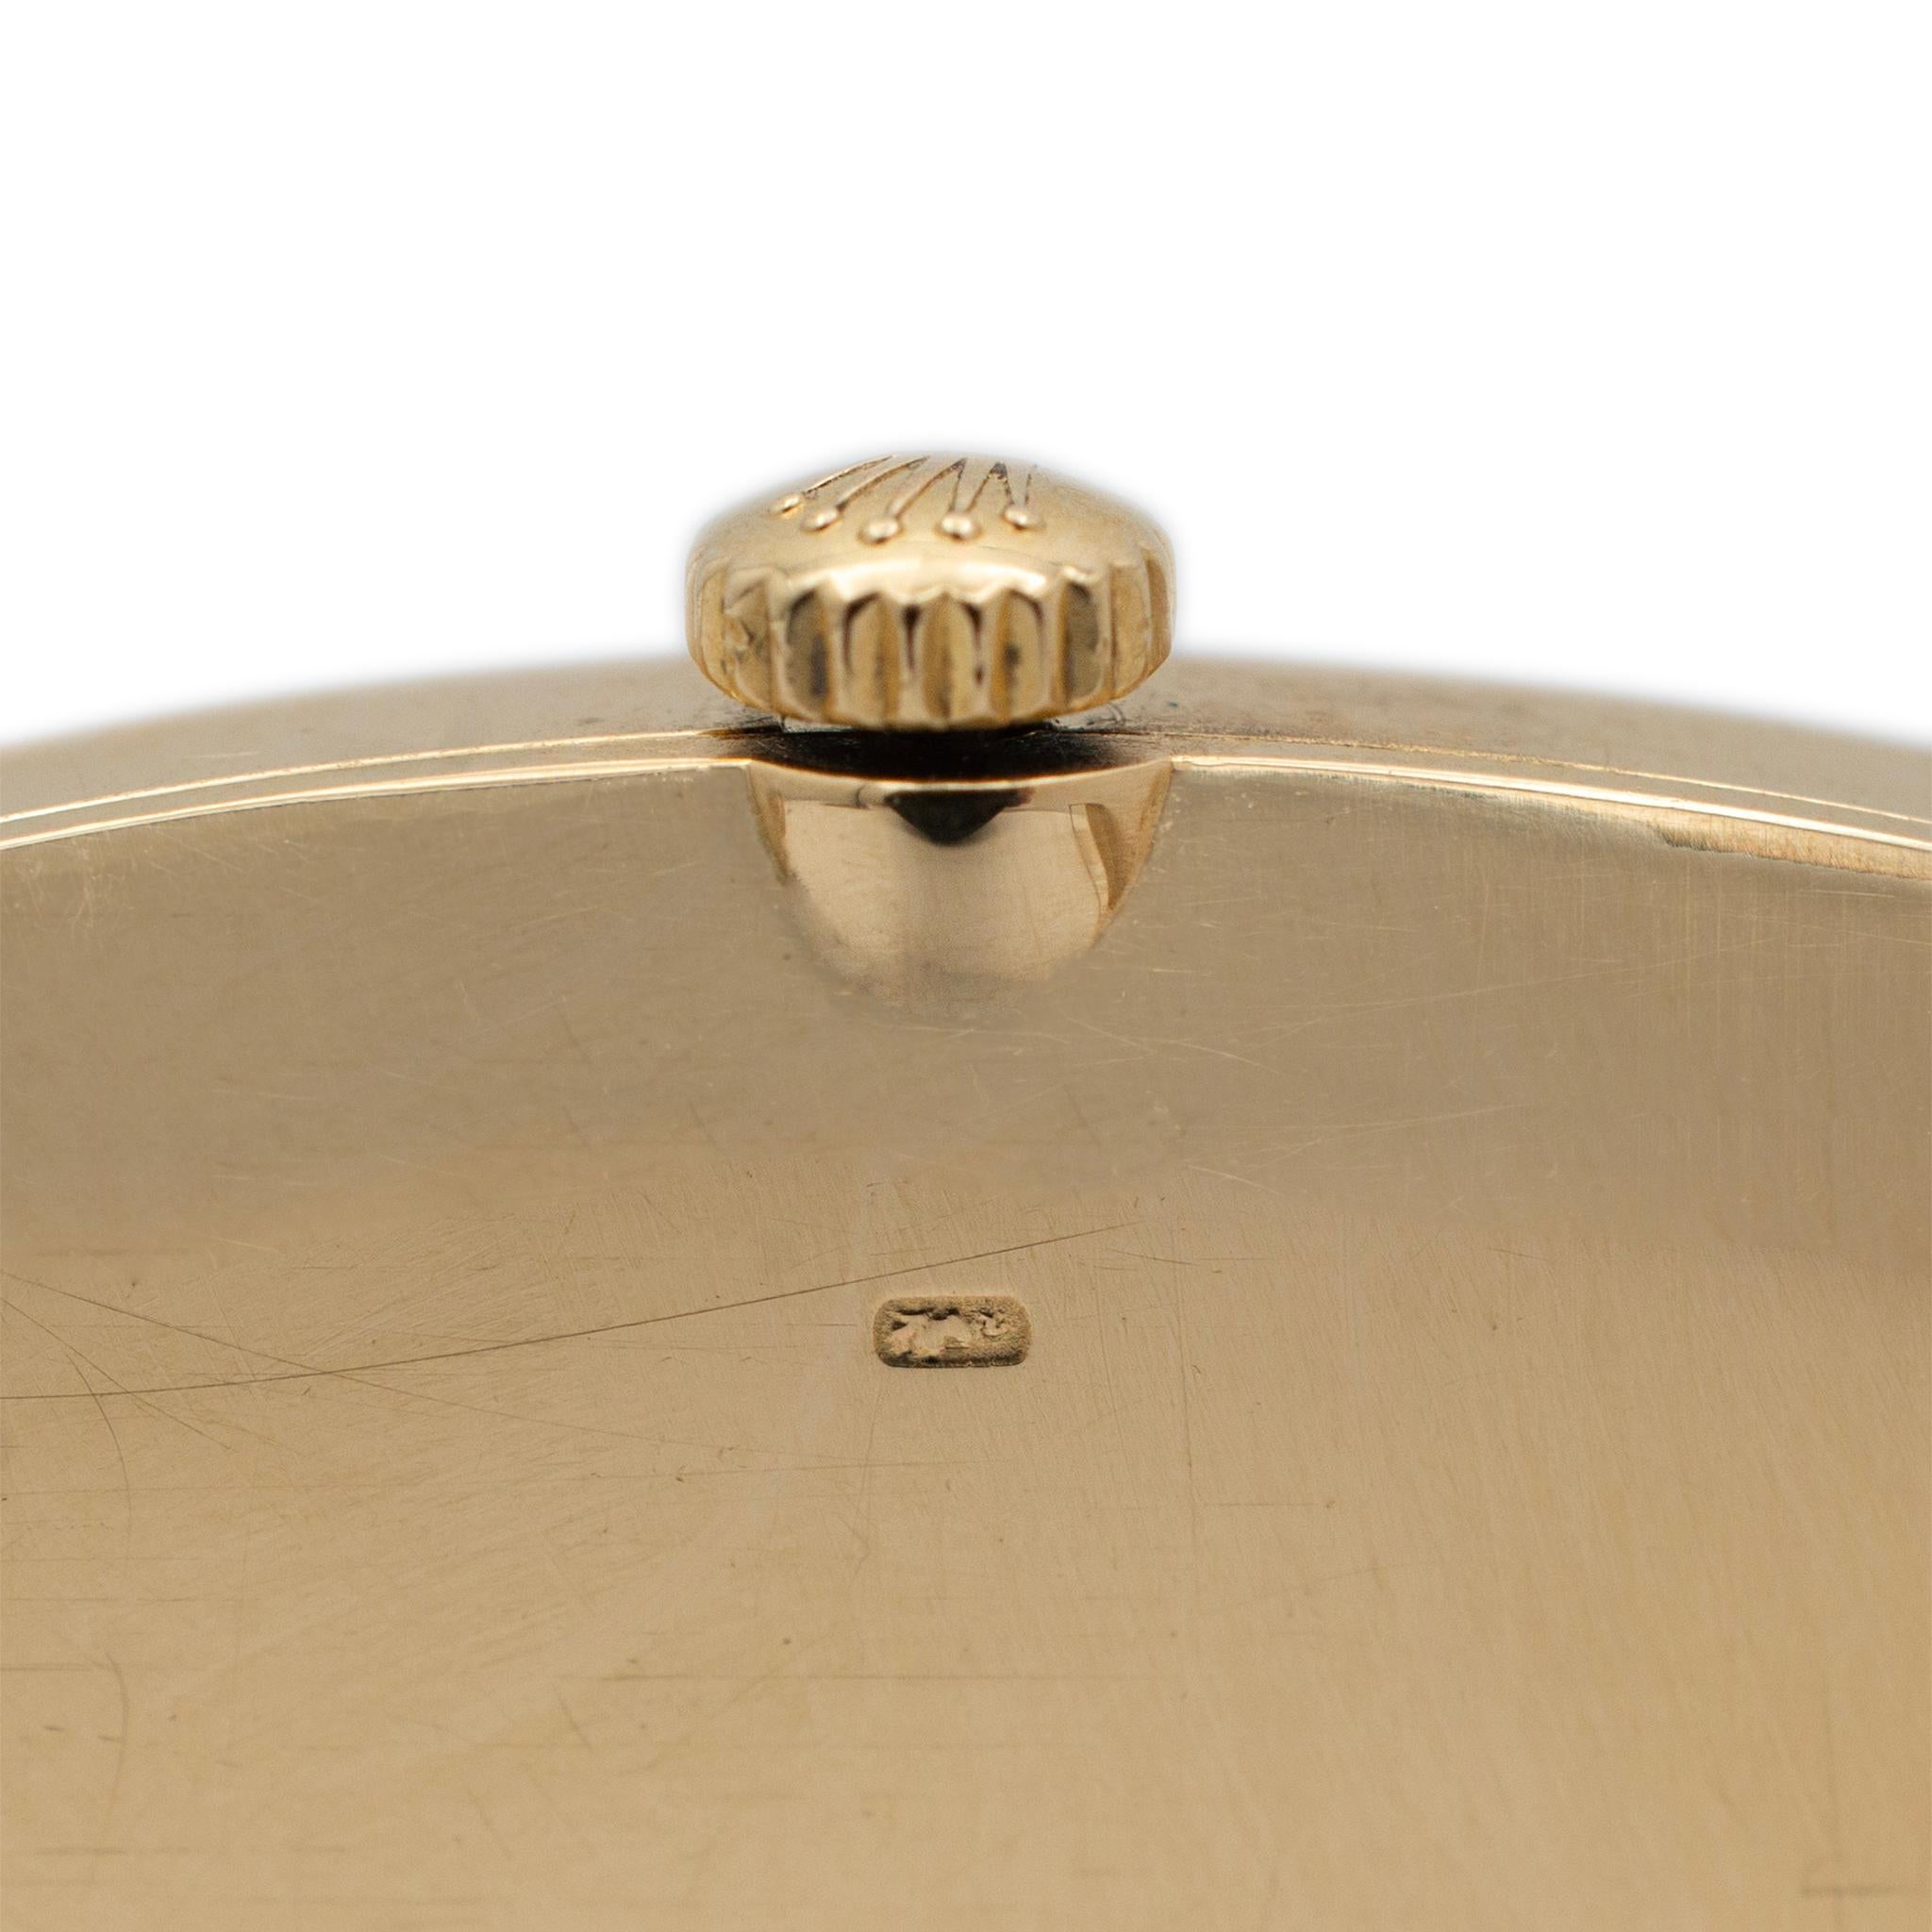 Vintage Rolex Cellini 26MM 3807 Champagne Dial 18K Yellow Gold Watch For Sale 3